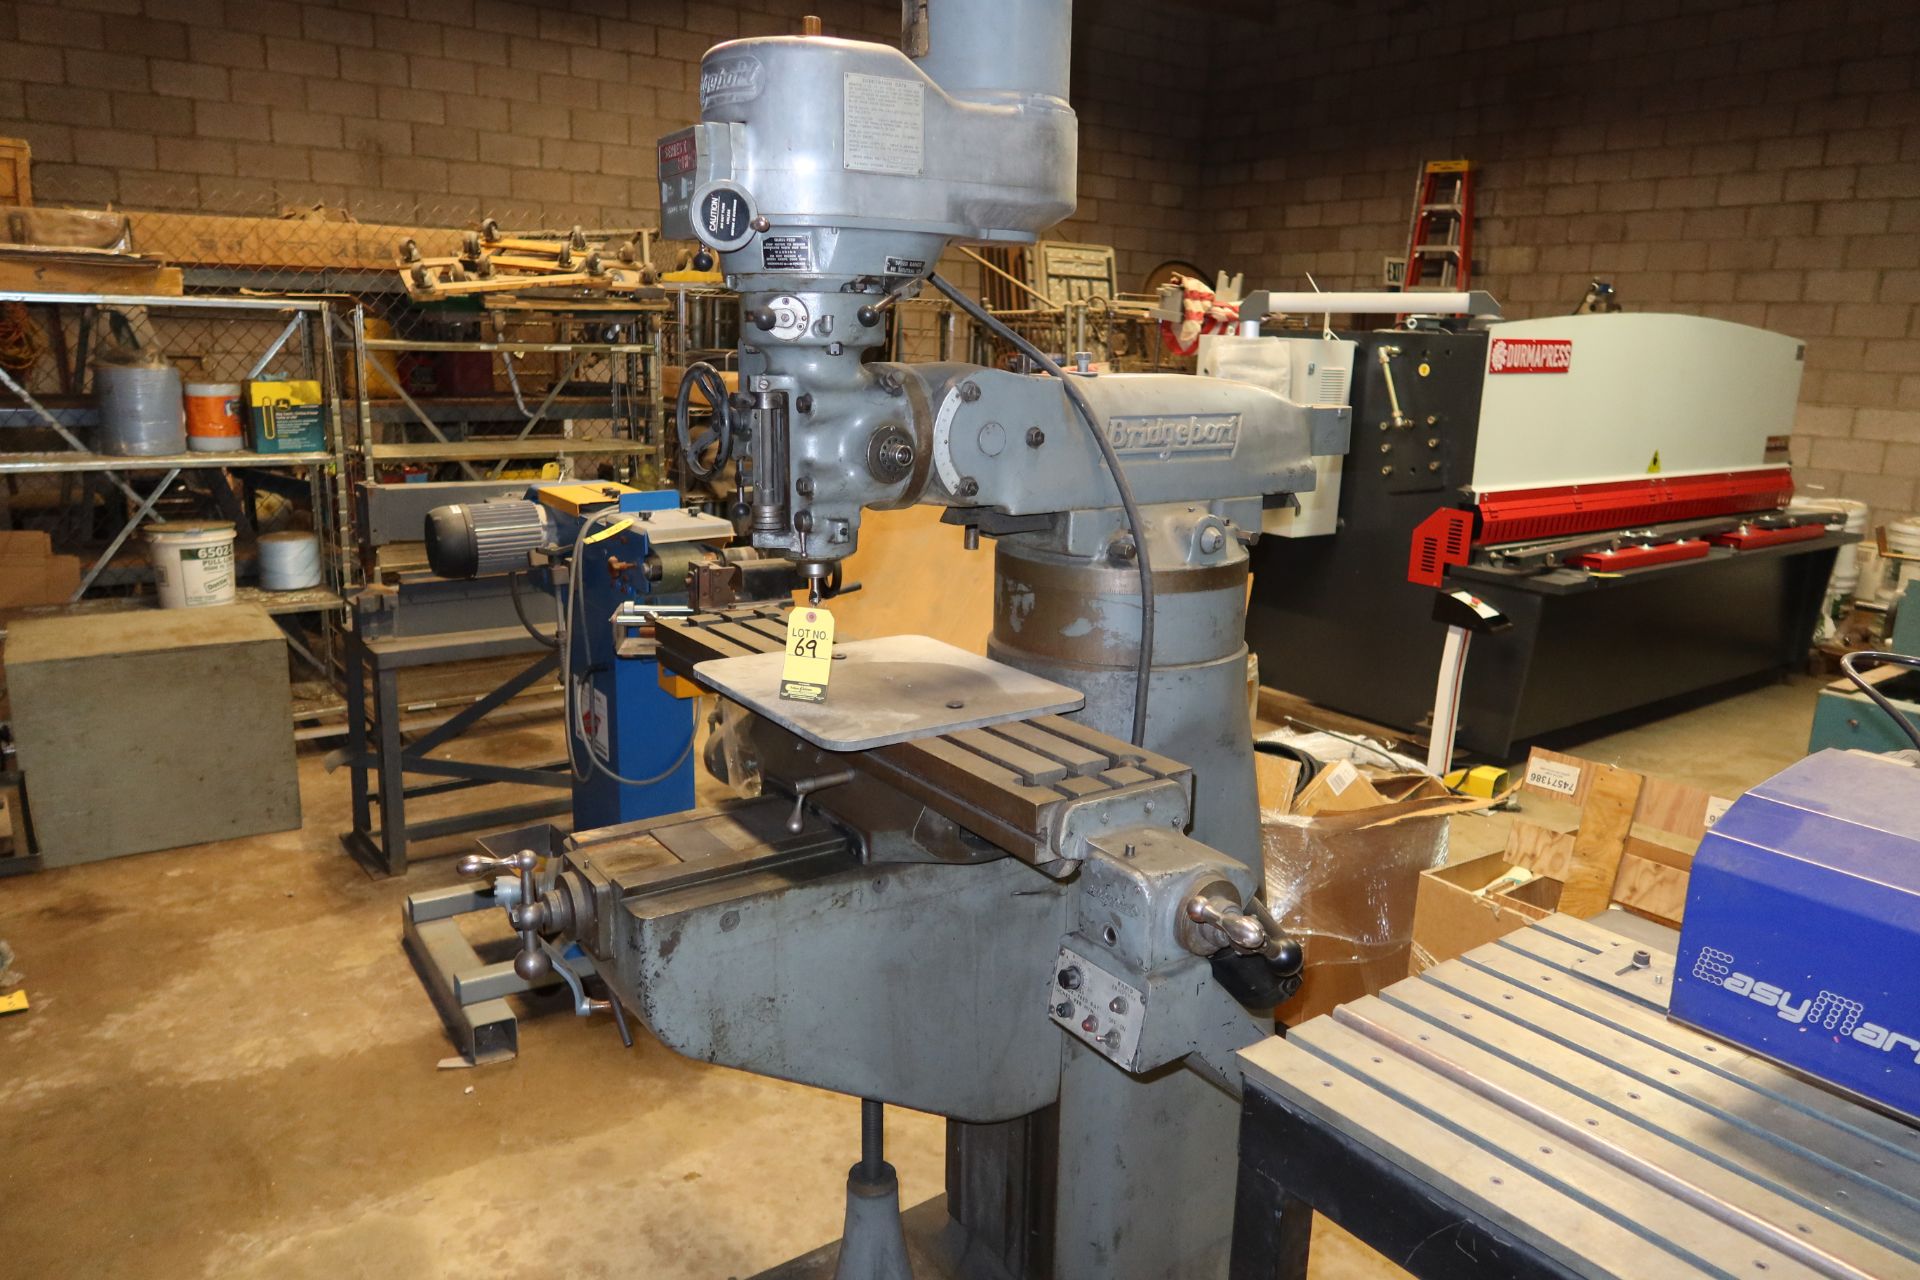 BRIDGEPORT VERTICAL MILL 42" TABLE W/ POWERFEED SN. 123271 - Image 3 of 4